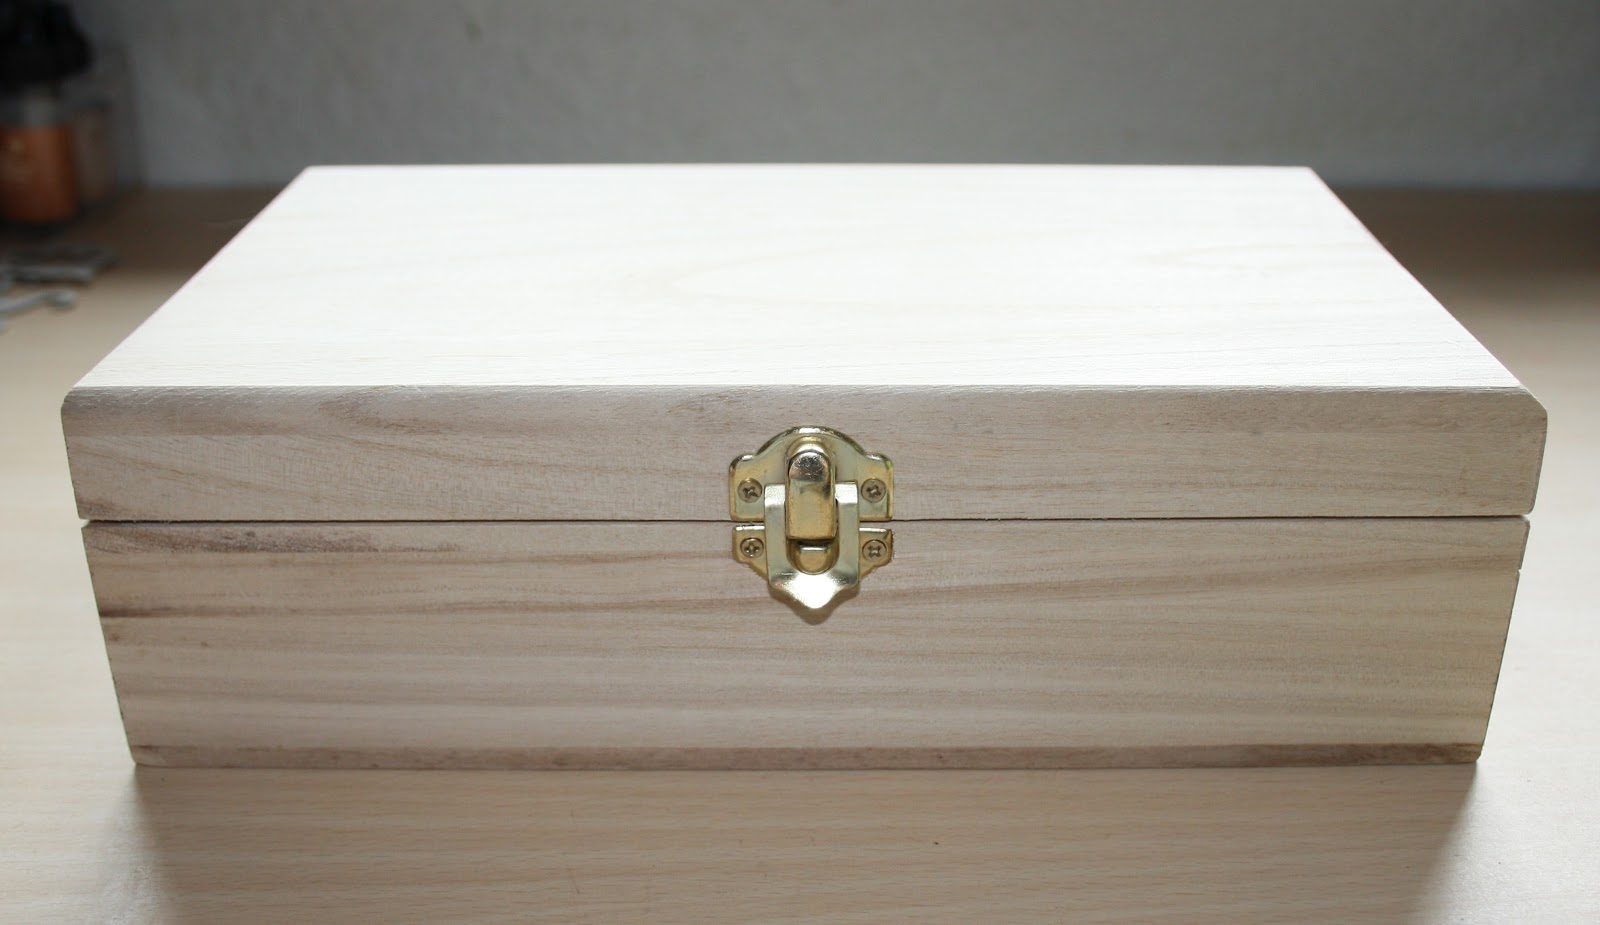 Free Design Woodworking: This is Build wood plans jewelry box